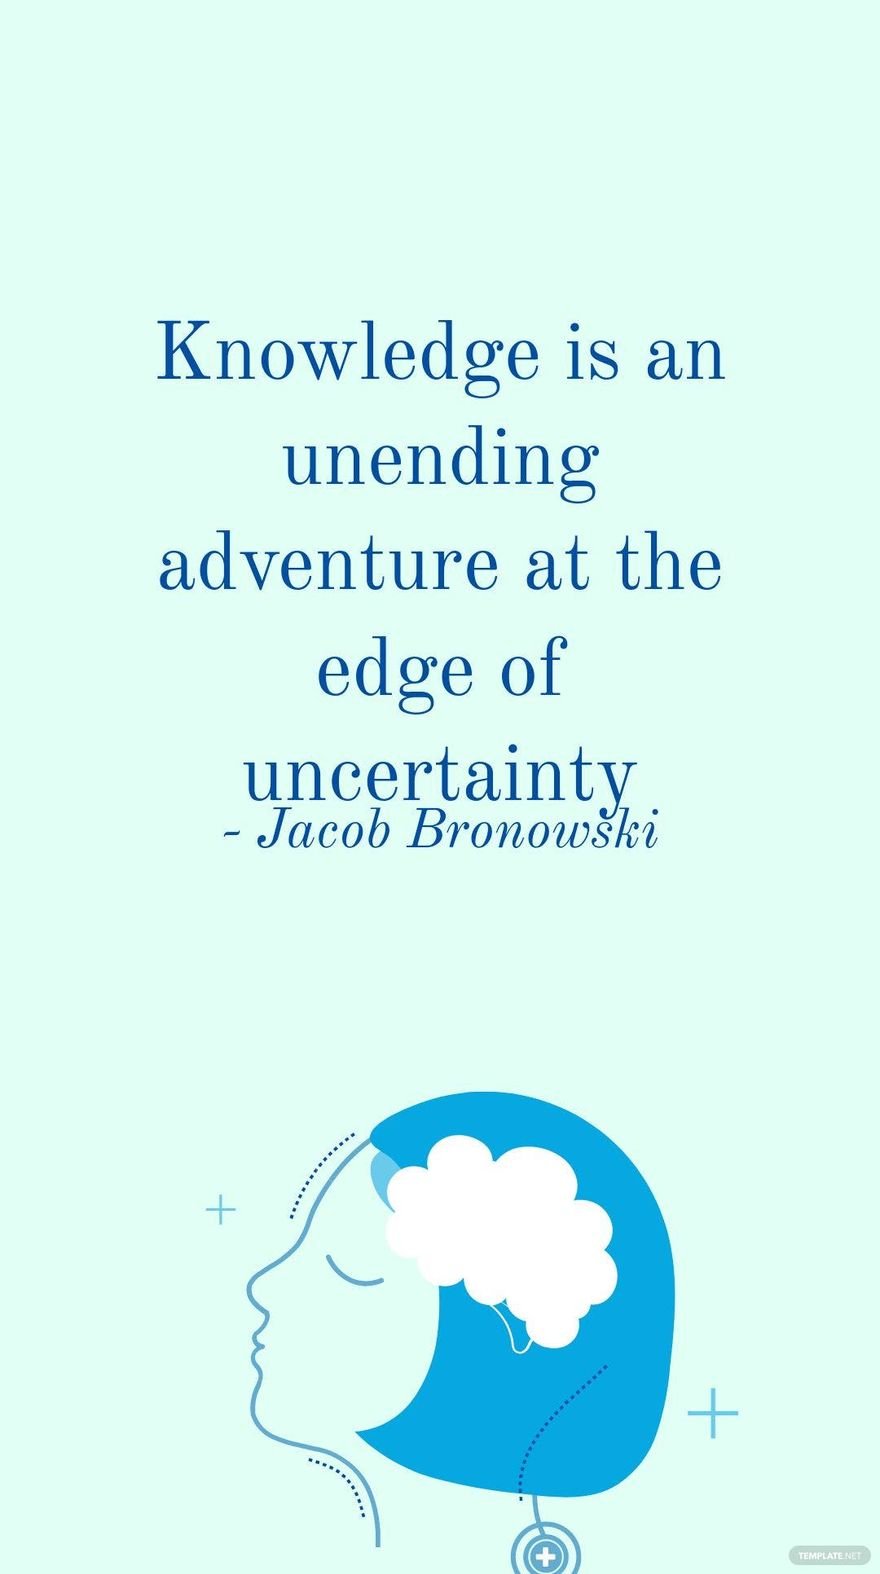 Free Jacob Bronowski - Knowledge is an unending adventure at the edge of uncertainty in JPG